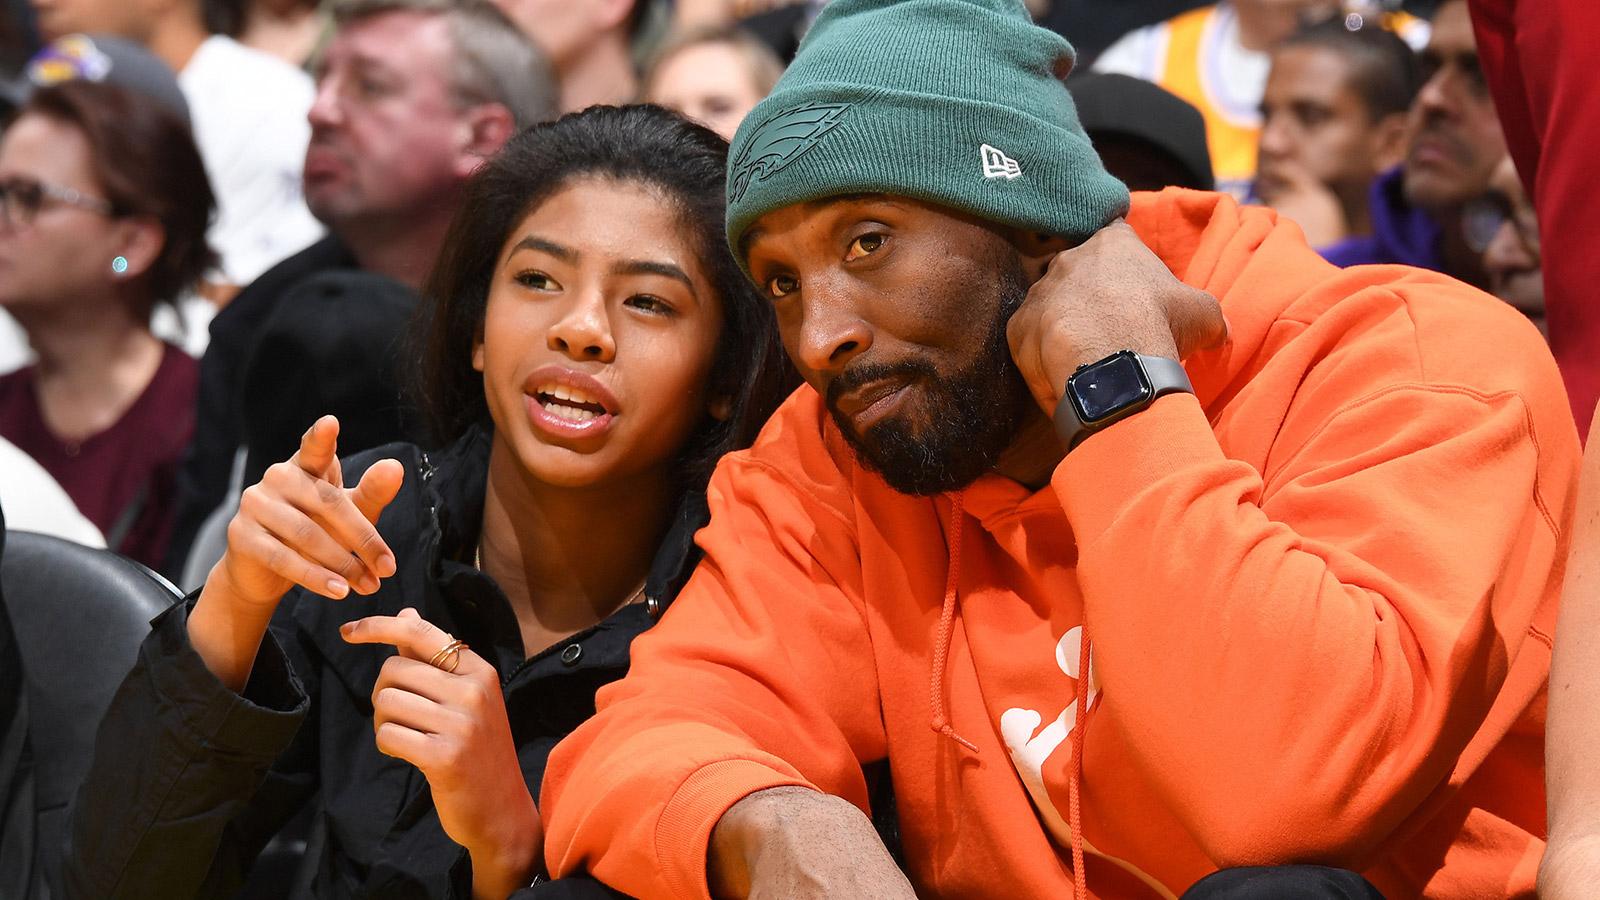 Kobe Bryant's daughter Gianna was in helicopter that crashed